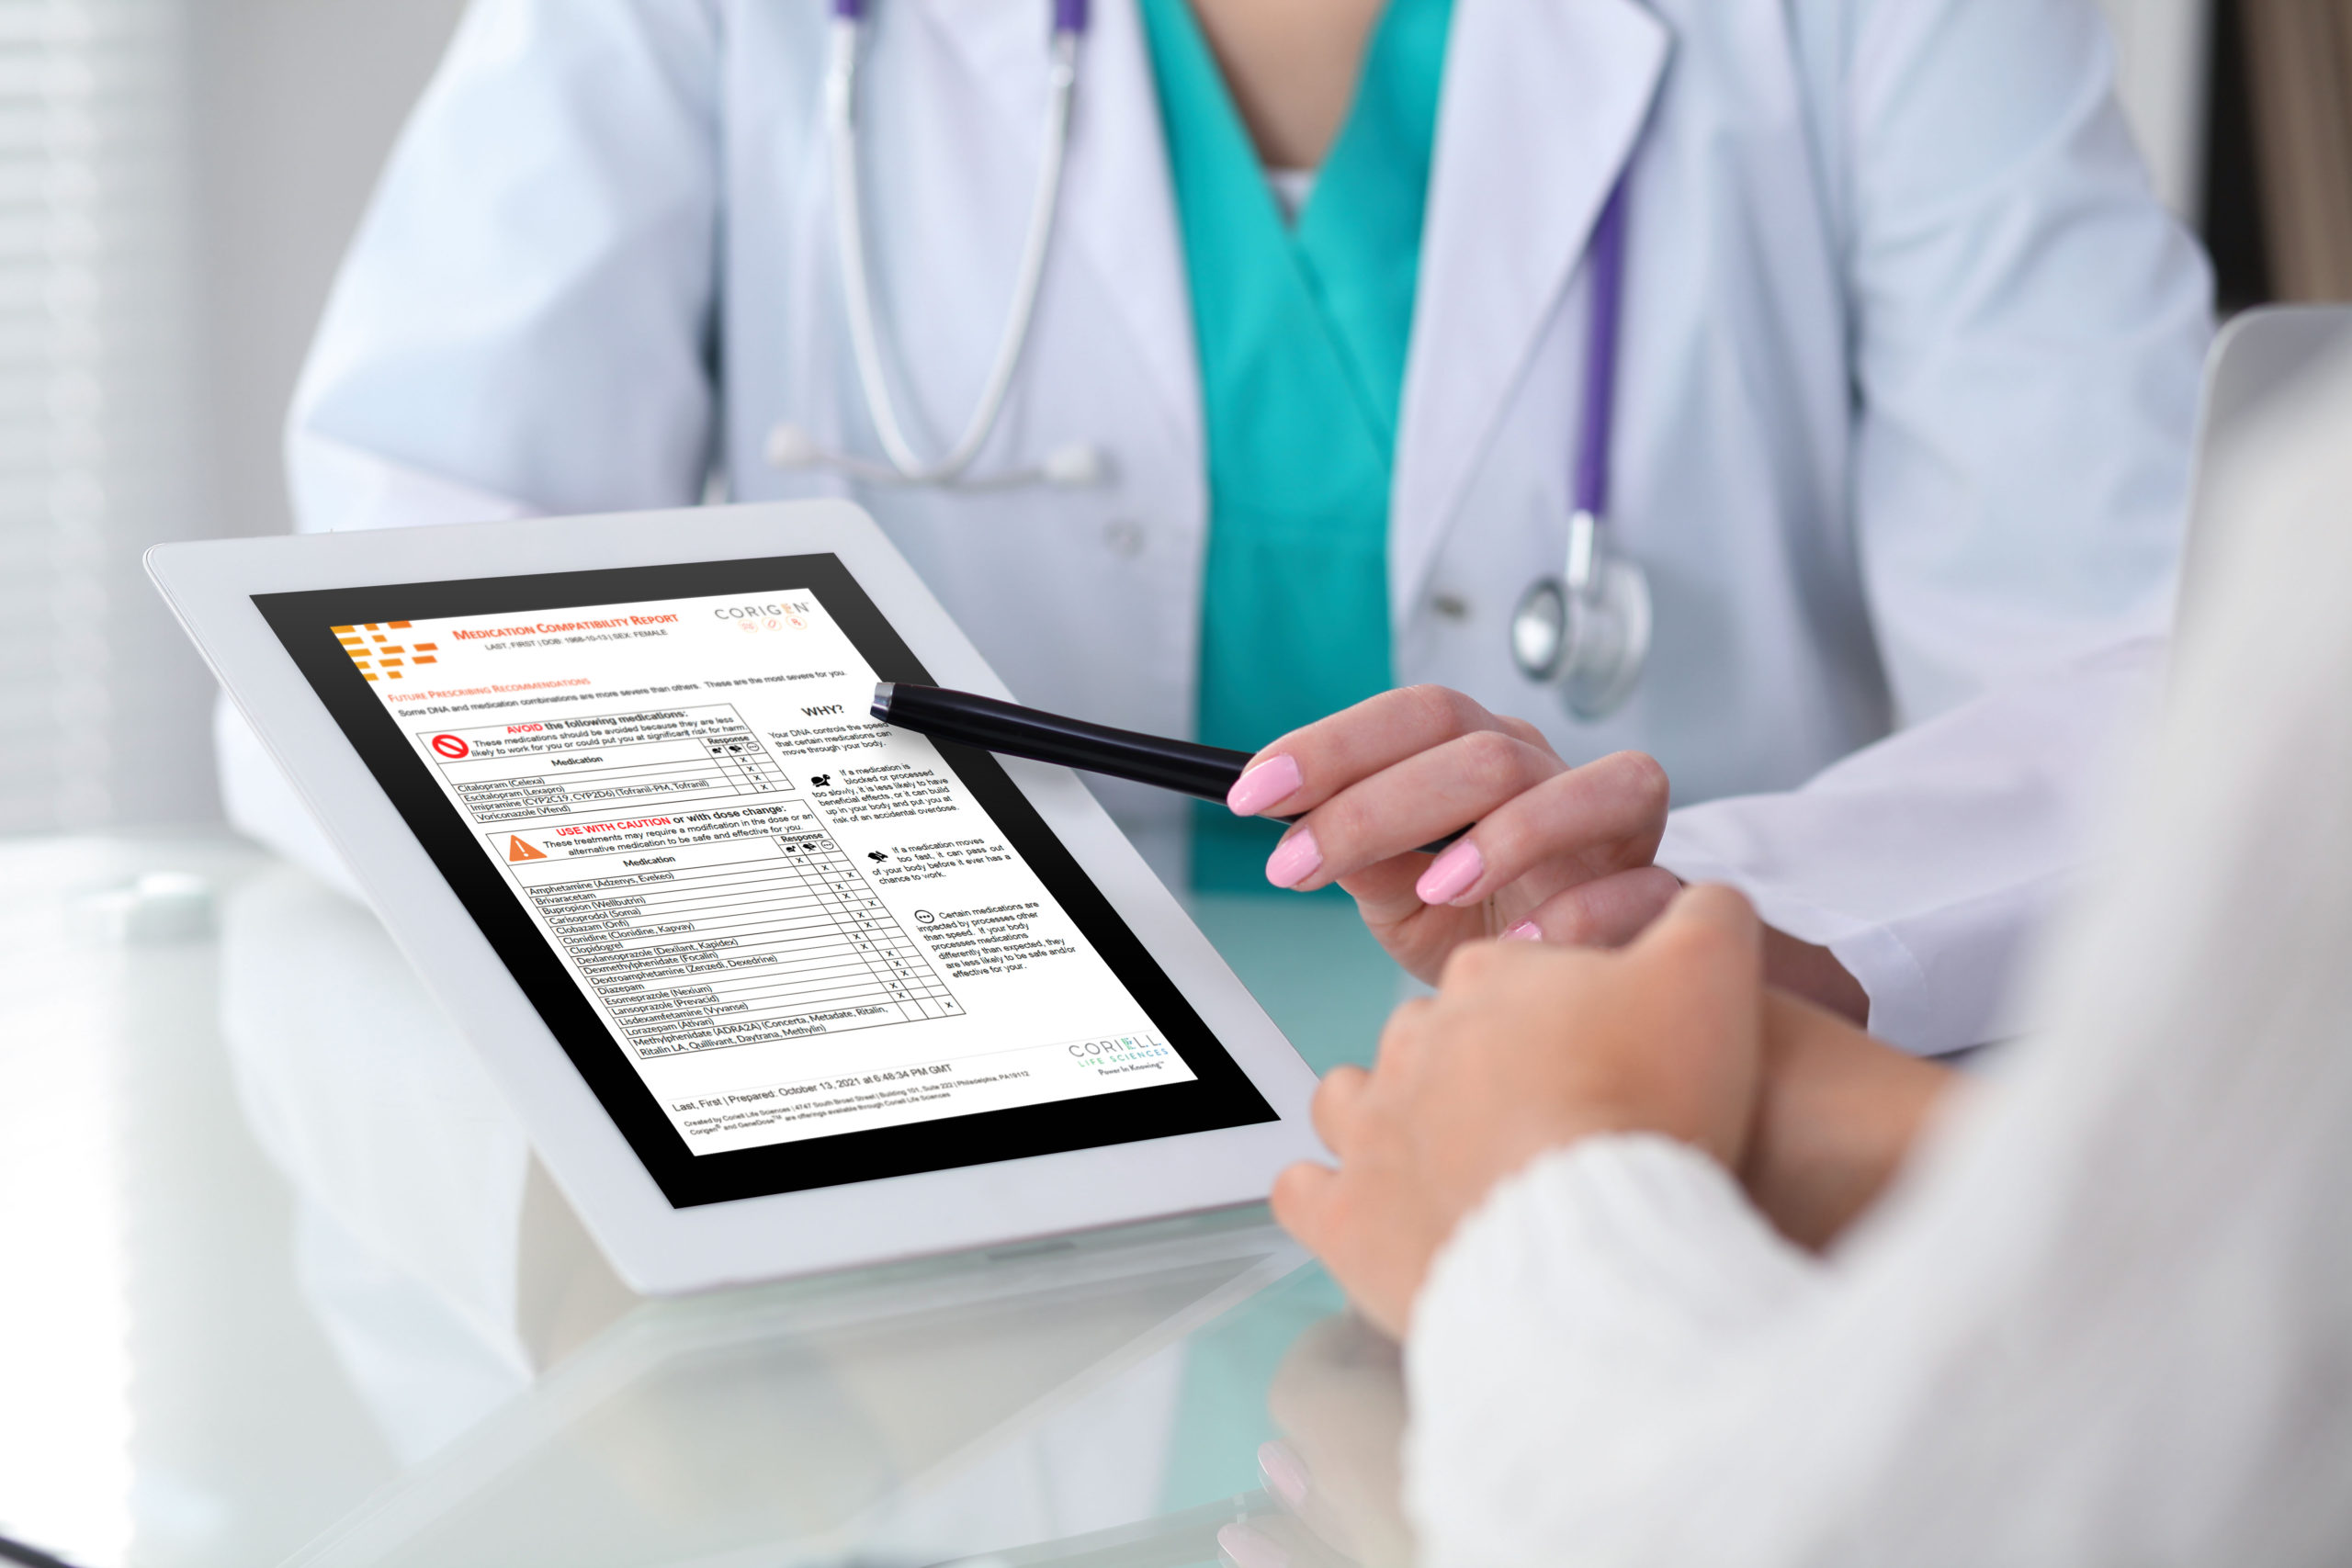 A doctor showing a patient their prescription drug compatibility test on a tablet